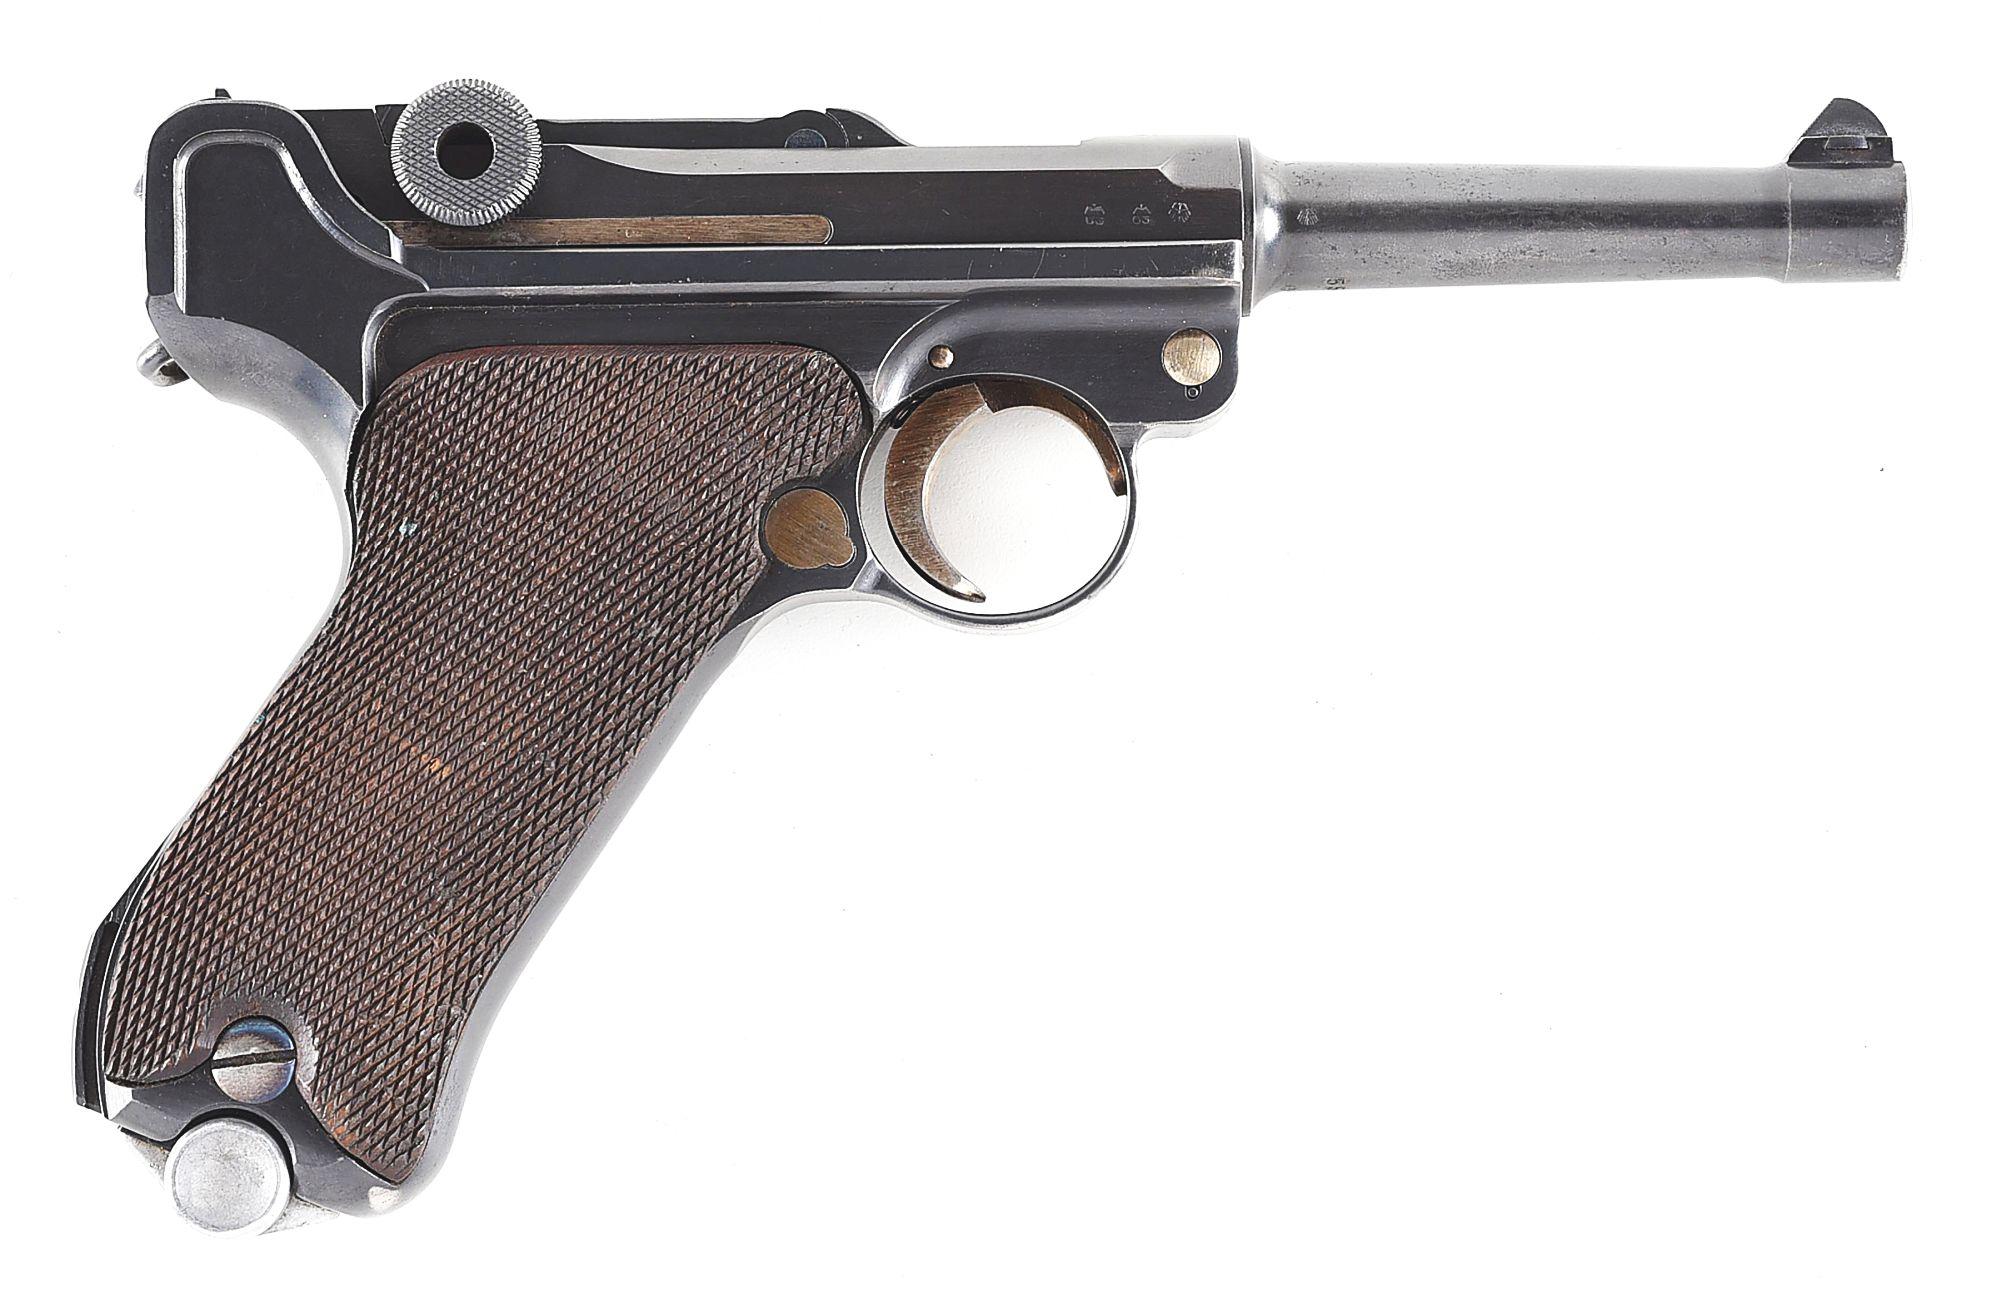 (C) 1936 DATE MAUSER "S/42" CODE P.08 LUGER SEMI AUTOMATIC PISTOL WITH HOLSTER.